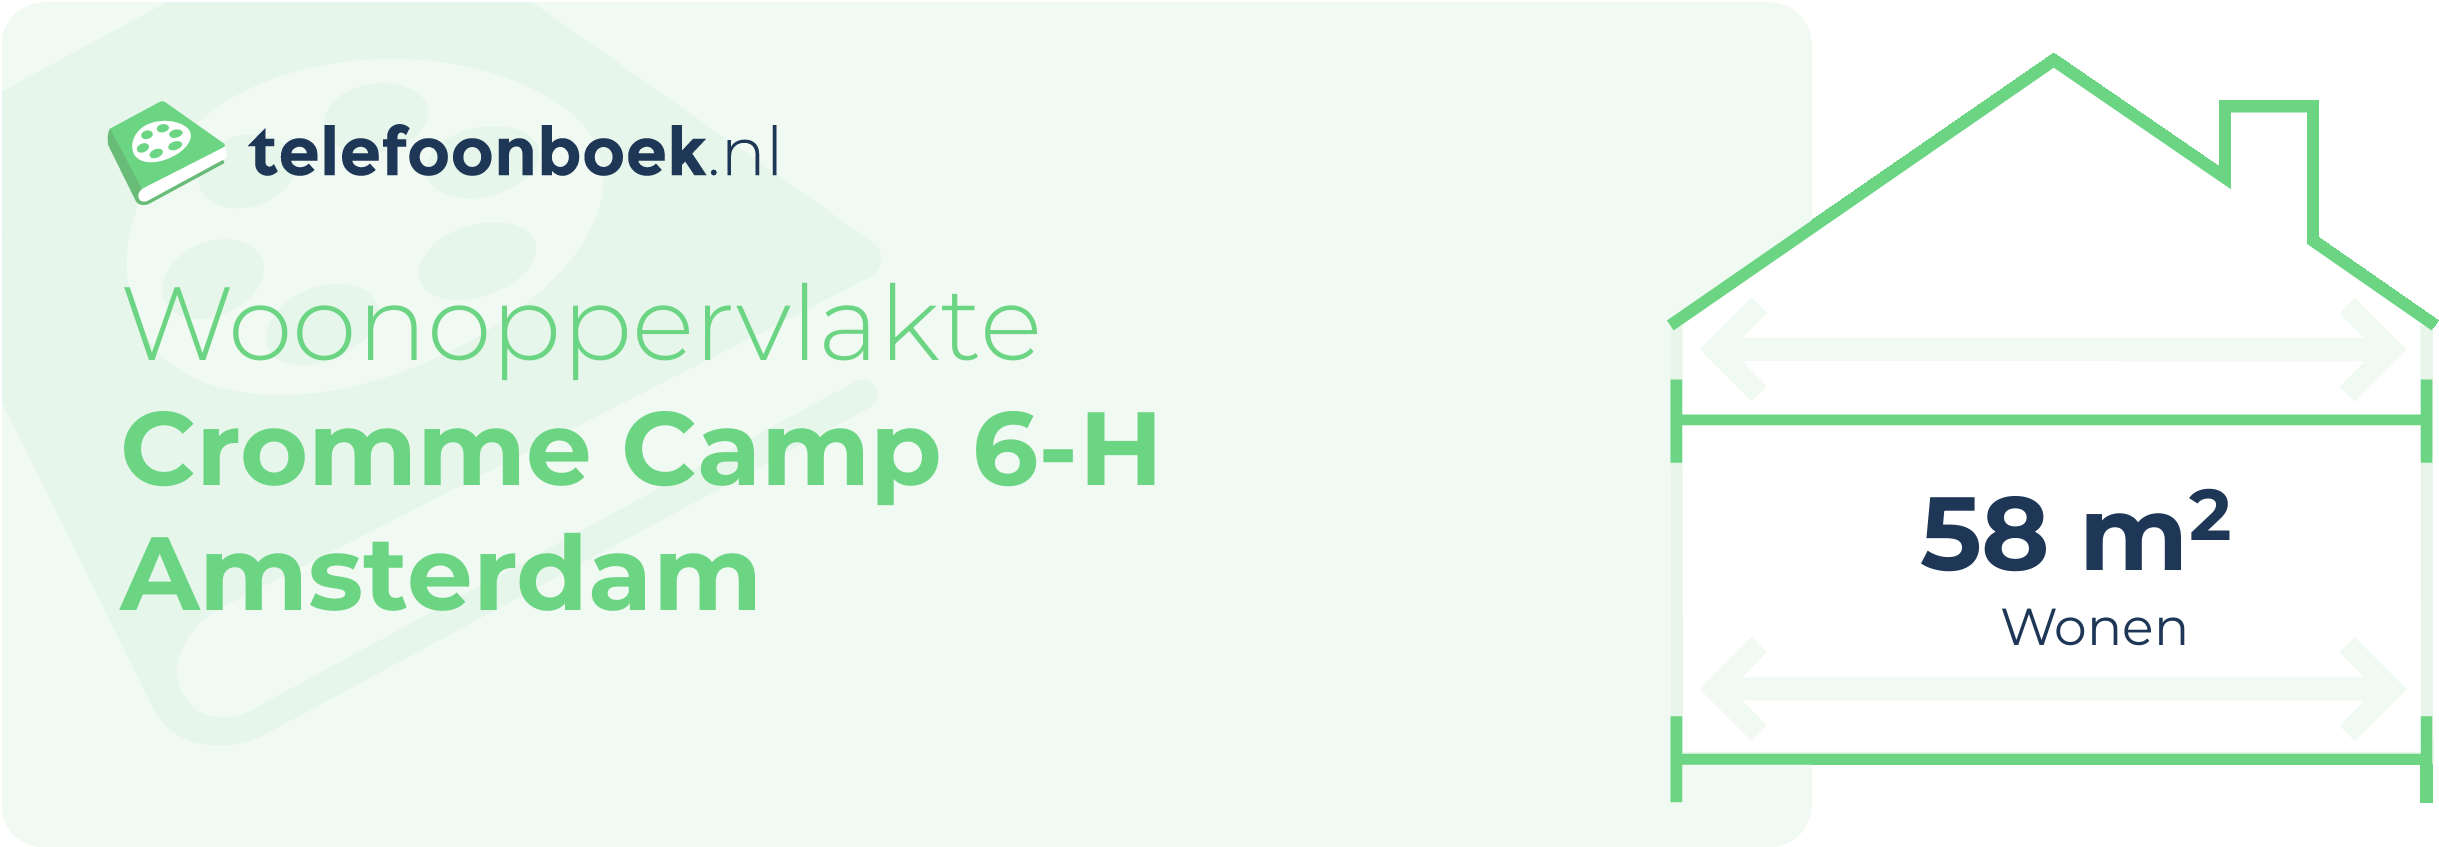 Woonoppervlakte Cromme Camp 6-H Amsterdam